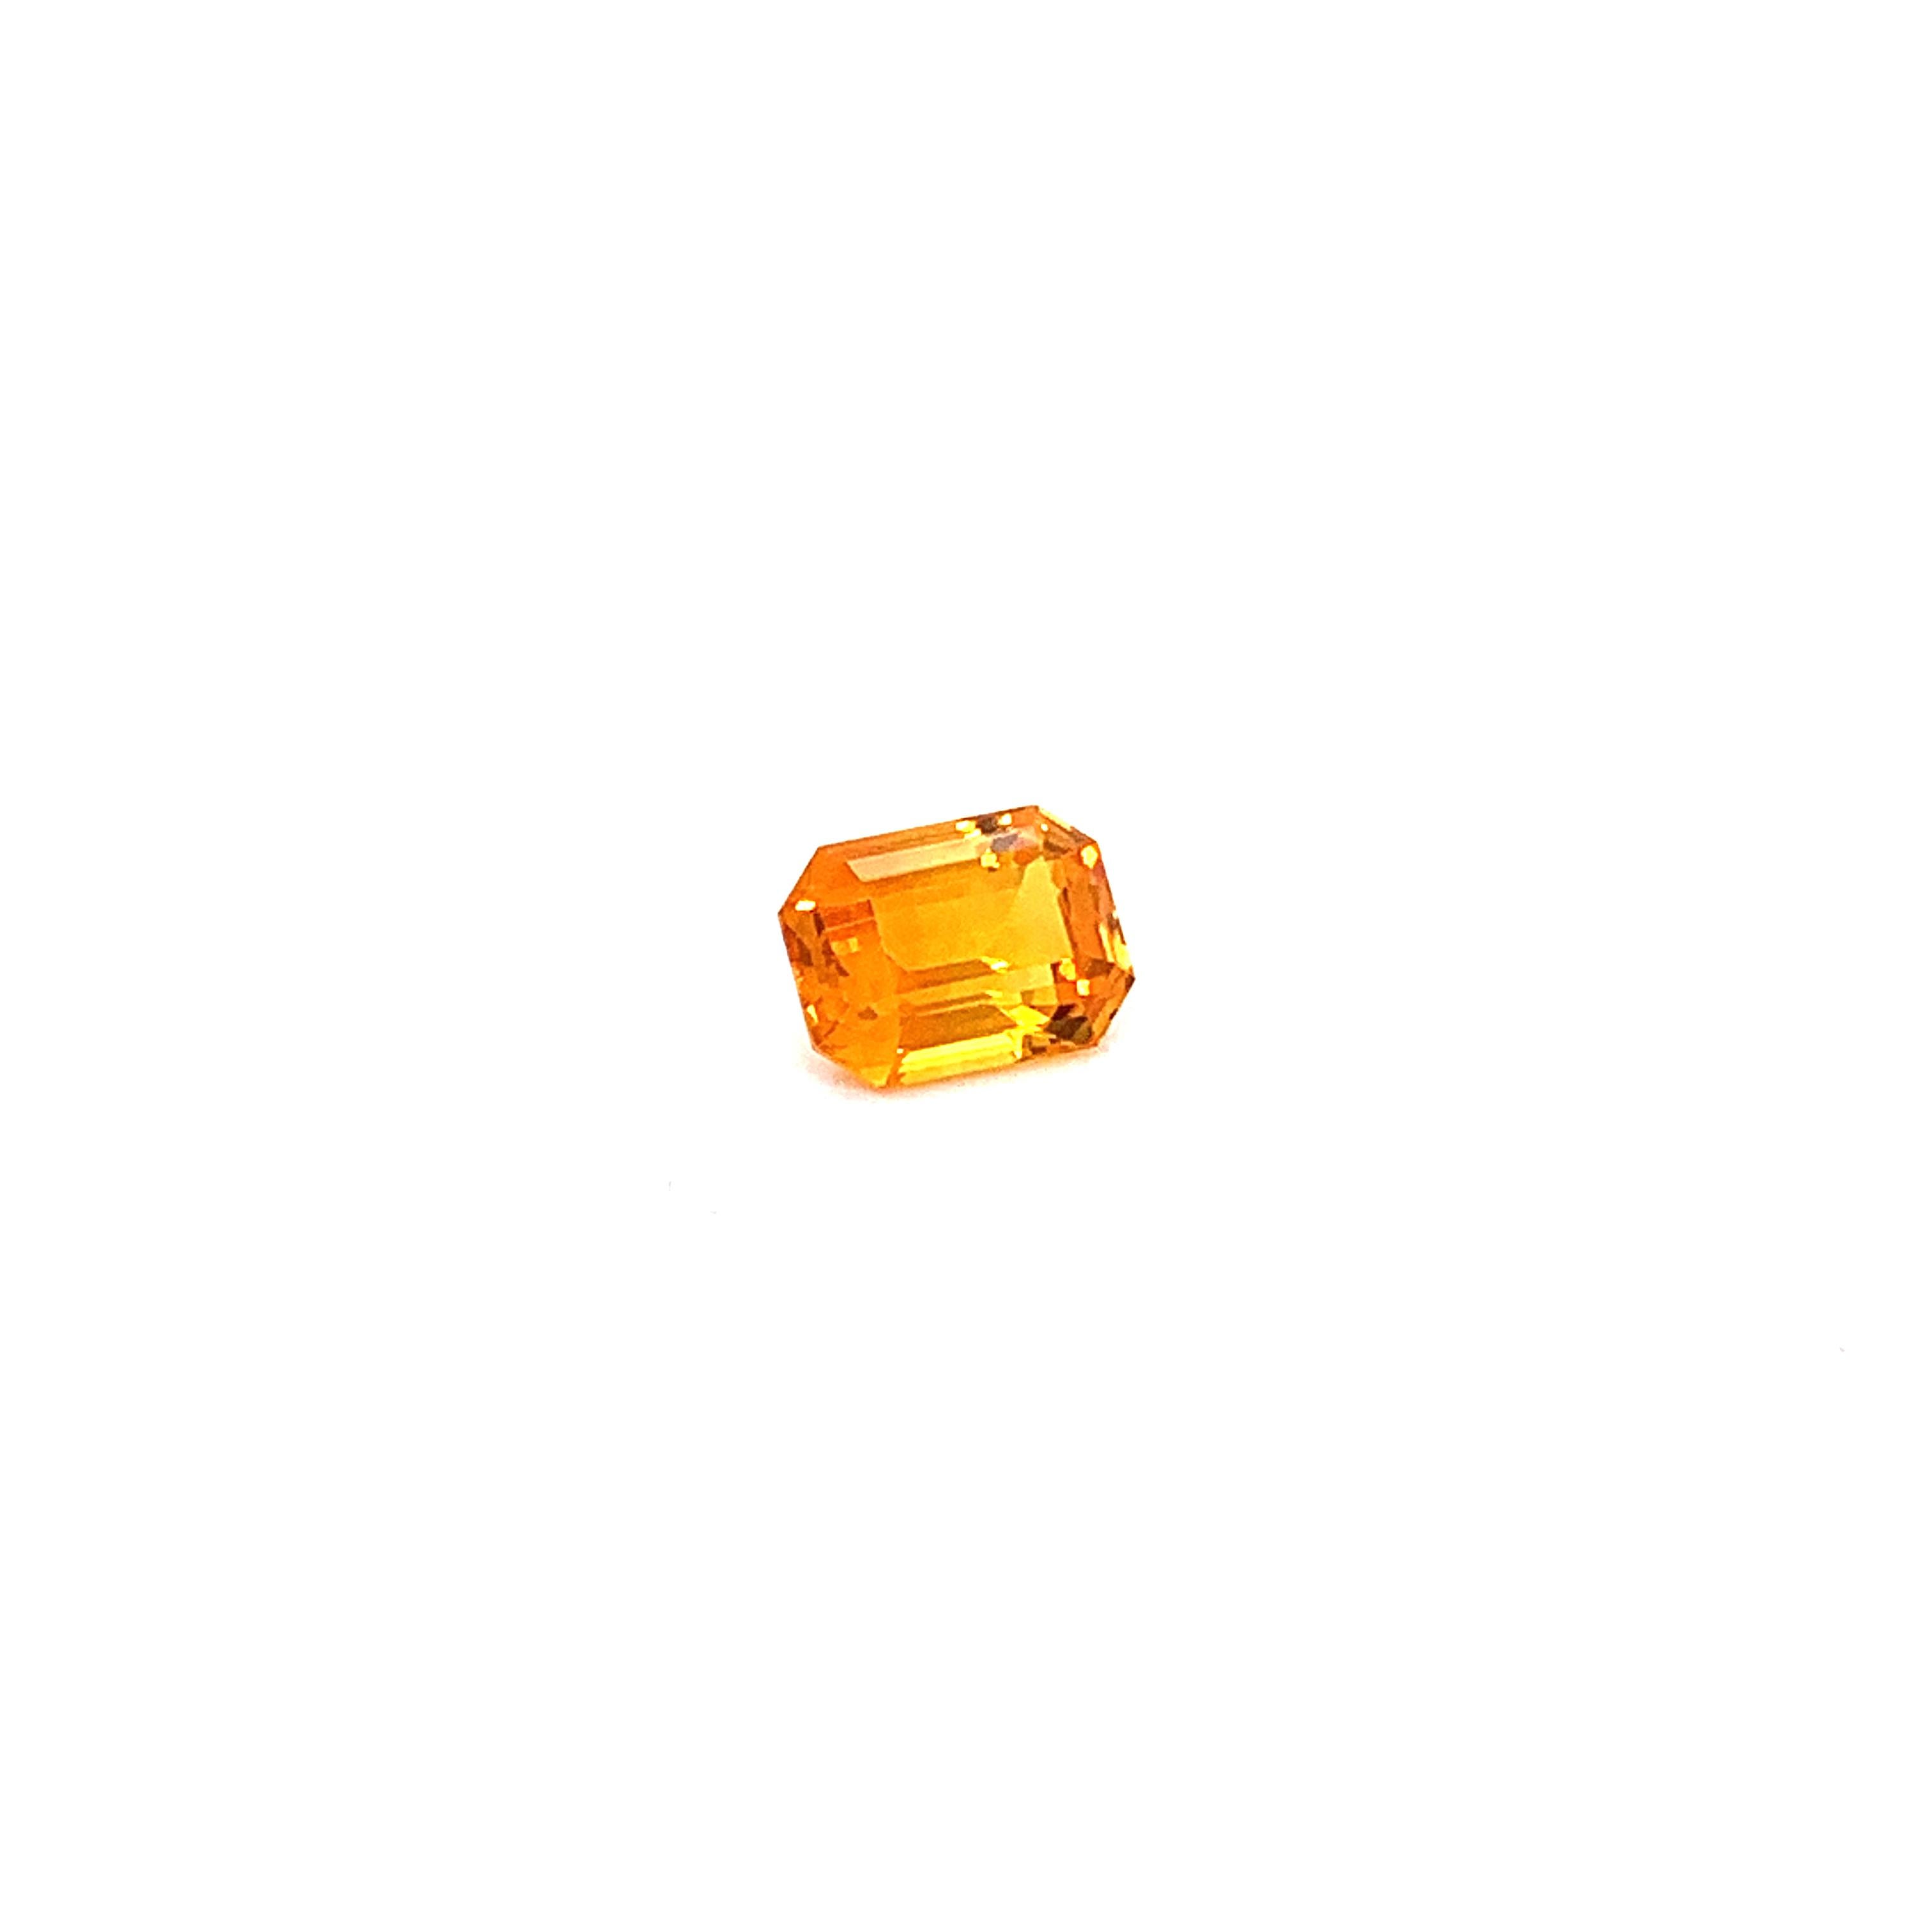 1.82 Carat Emerald-Cut Natural Orange Sapphire:

A beautiful stone, it is an emerald-cut orange sapphire weighing a total of 1.82 carat. The sapphire has excellent cutting proportions, and possess extremely fine colour saturation and brilliance. The